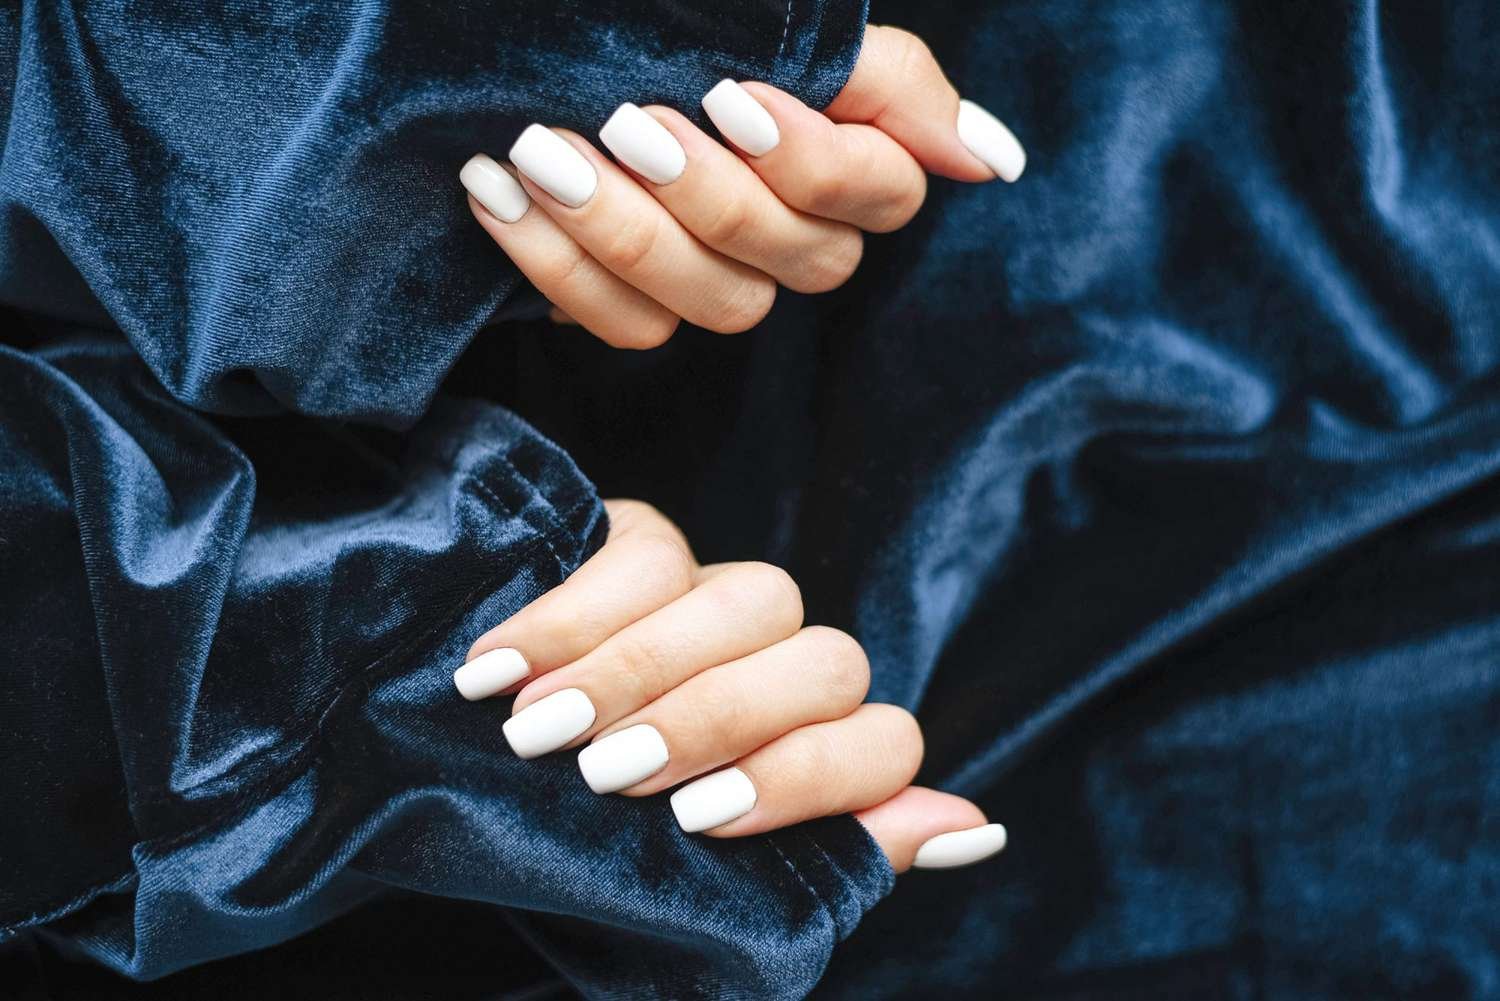 The Unexpected Holiday Manicure That's Been Blowing Up on Instagram